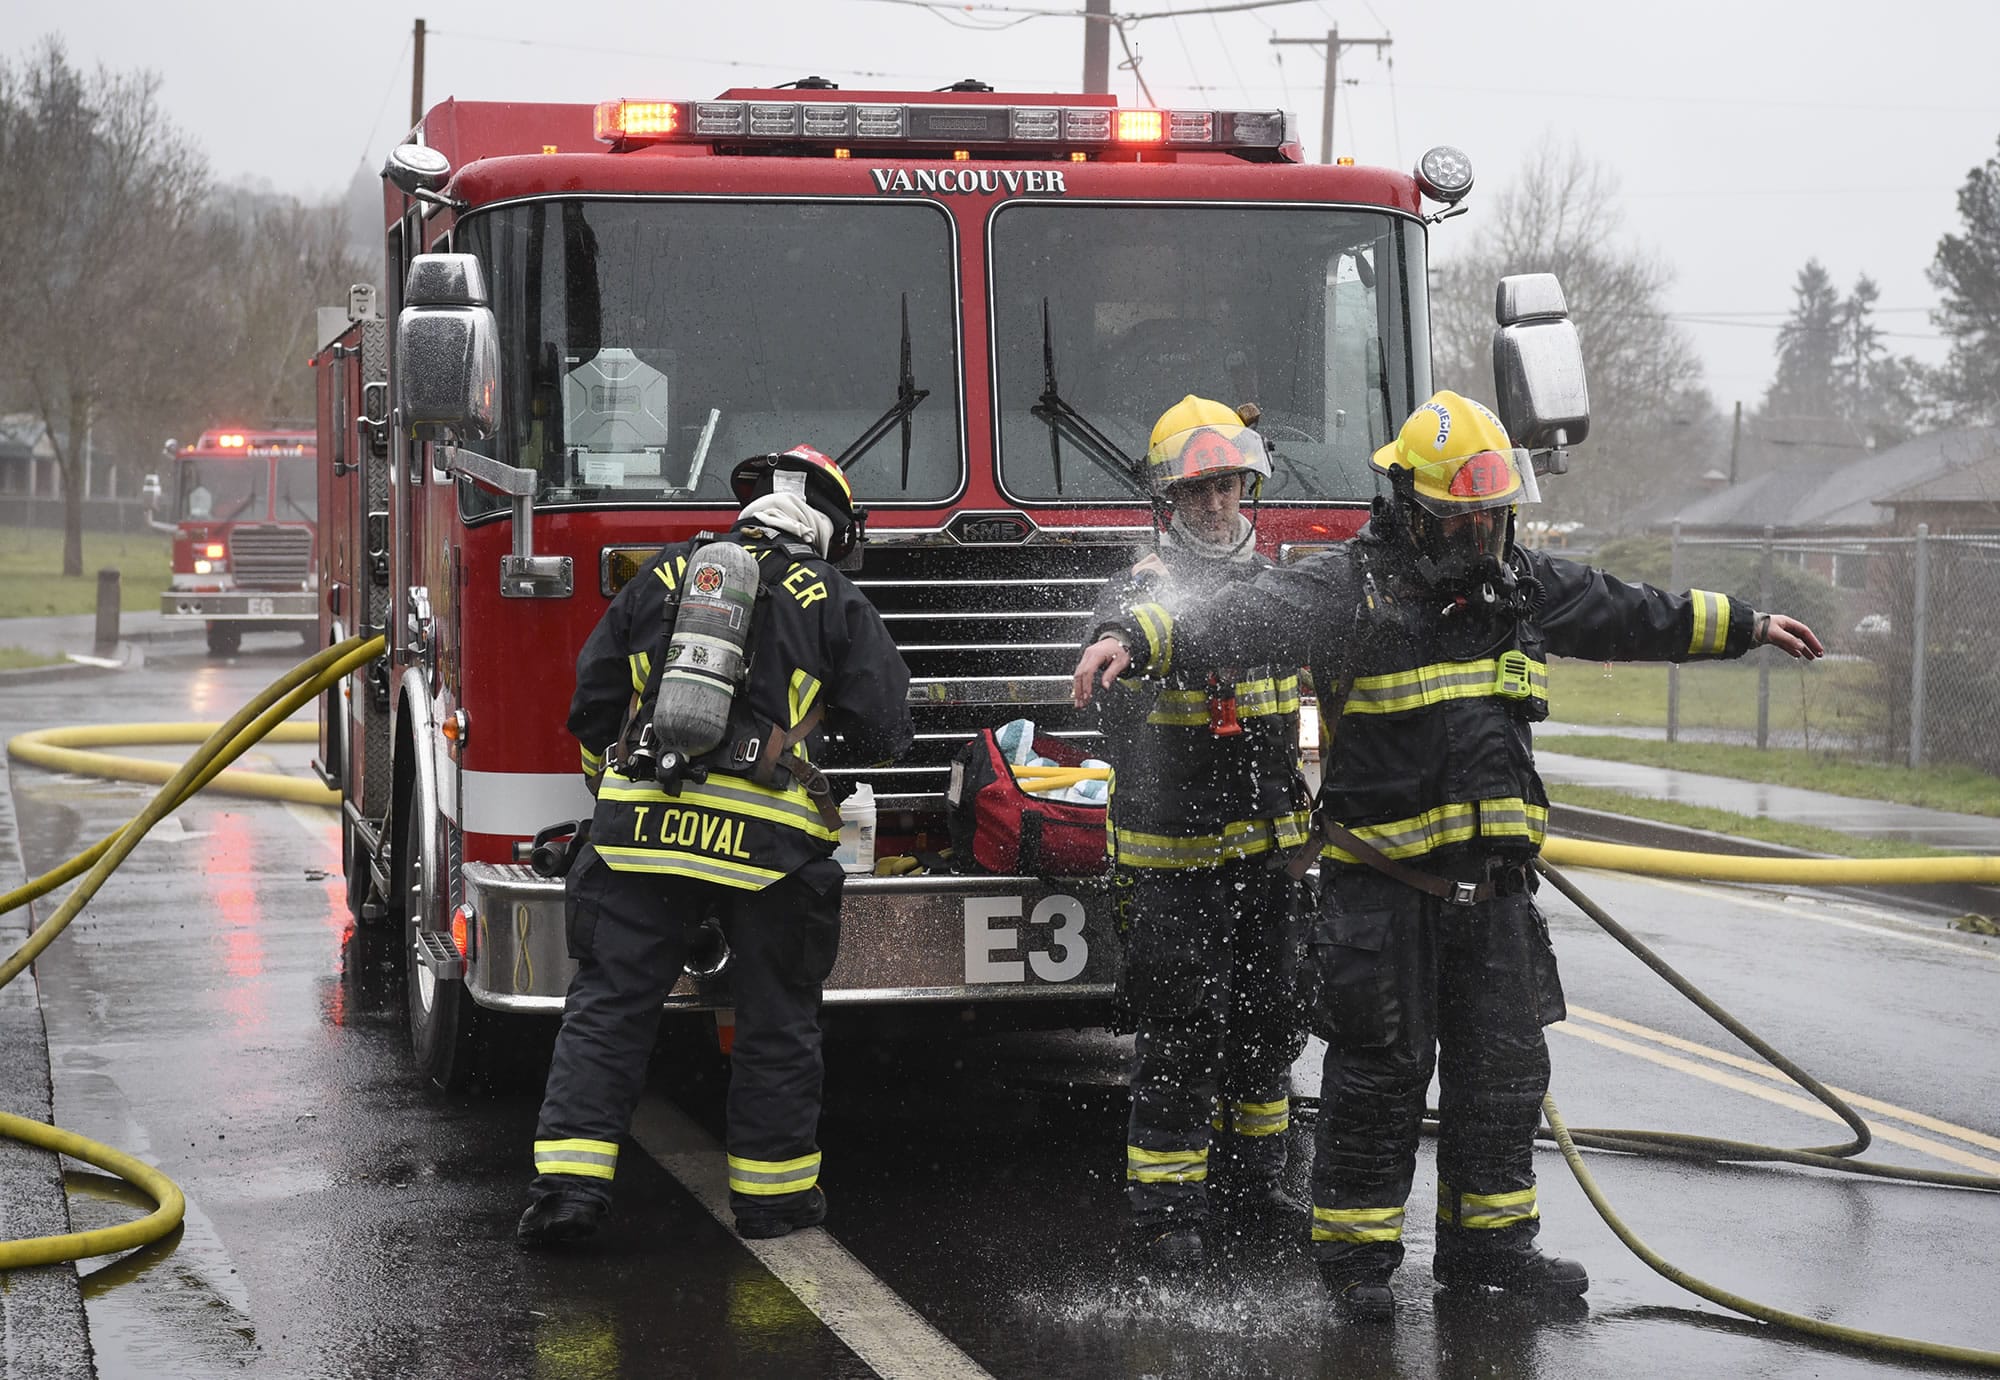 Members of the Vancouver Fire Department clean off after putting out a fire in March.